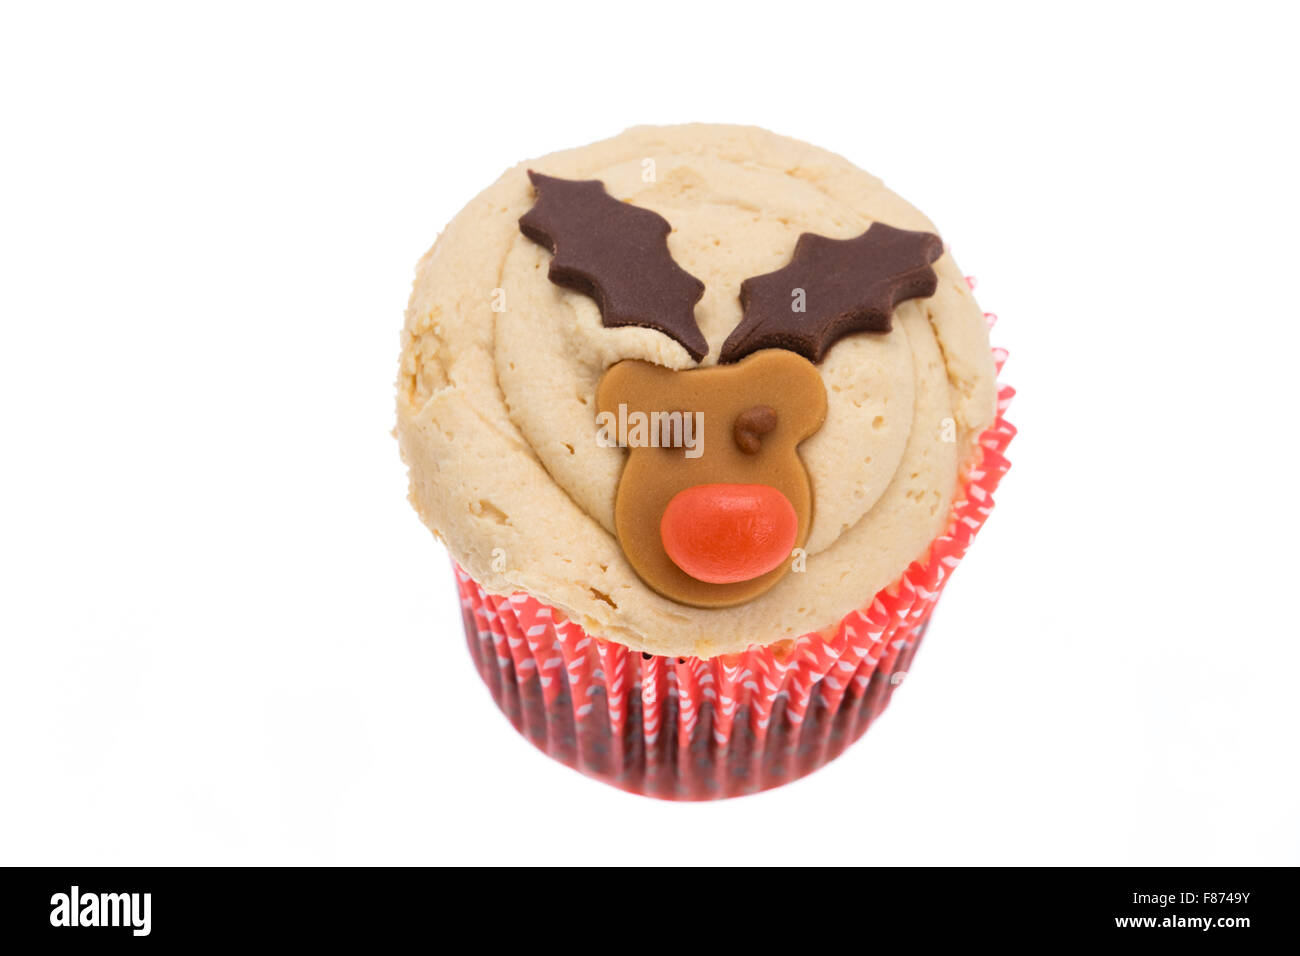 Christmas Rudolph reindeer cupcake - studio shot with a white background Stock Photo